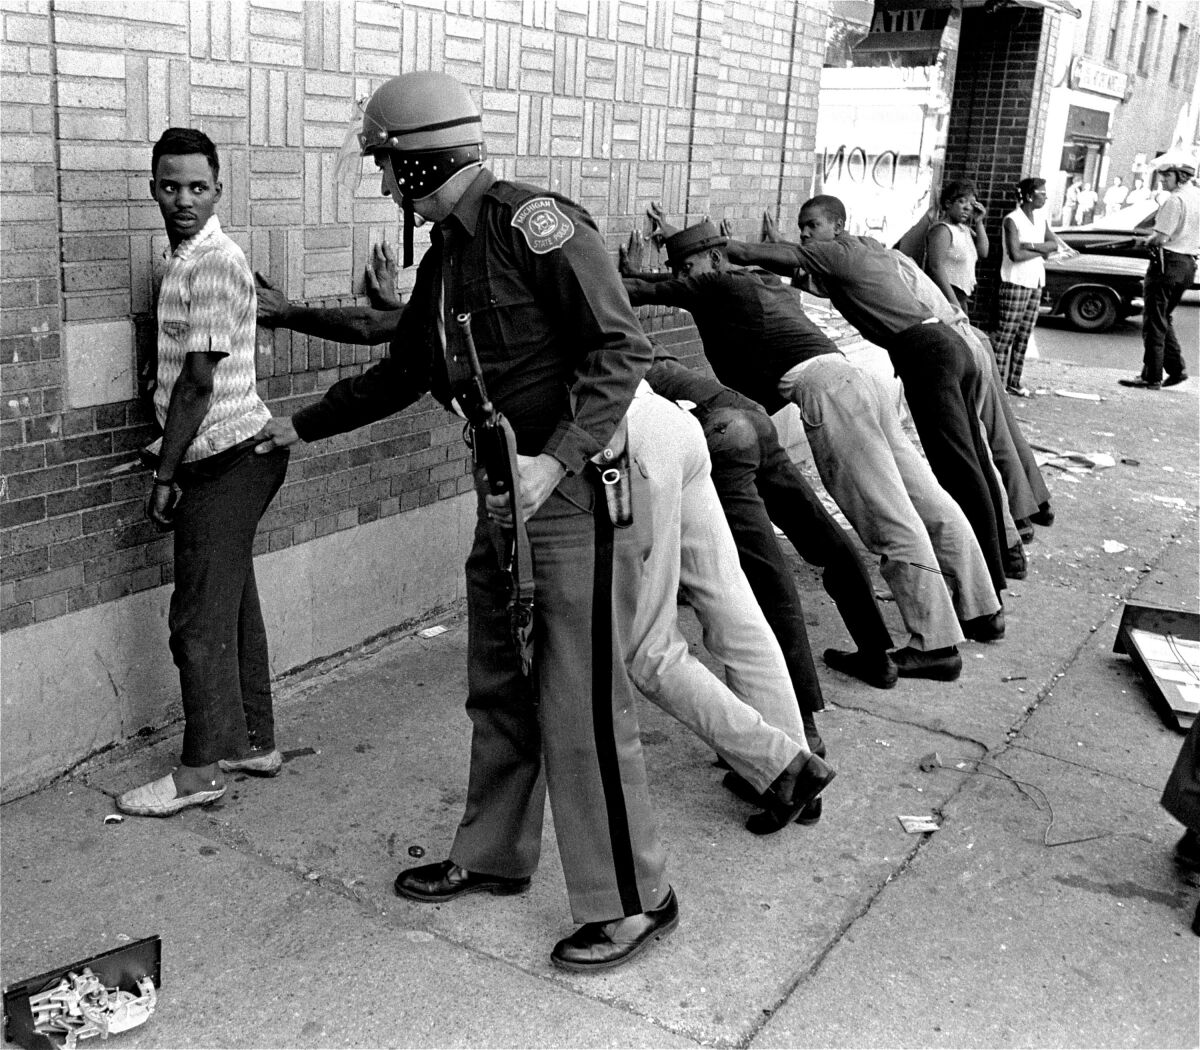 A police officer searches a youth as others are lined up against a wall.